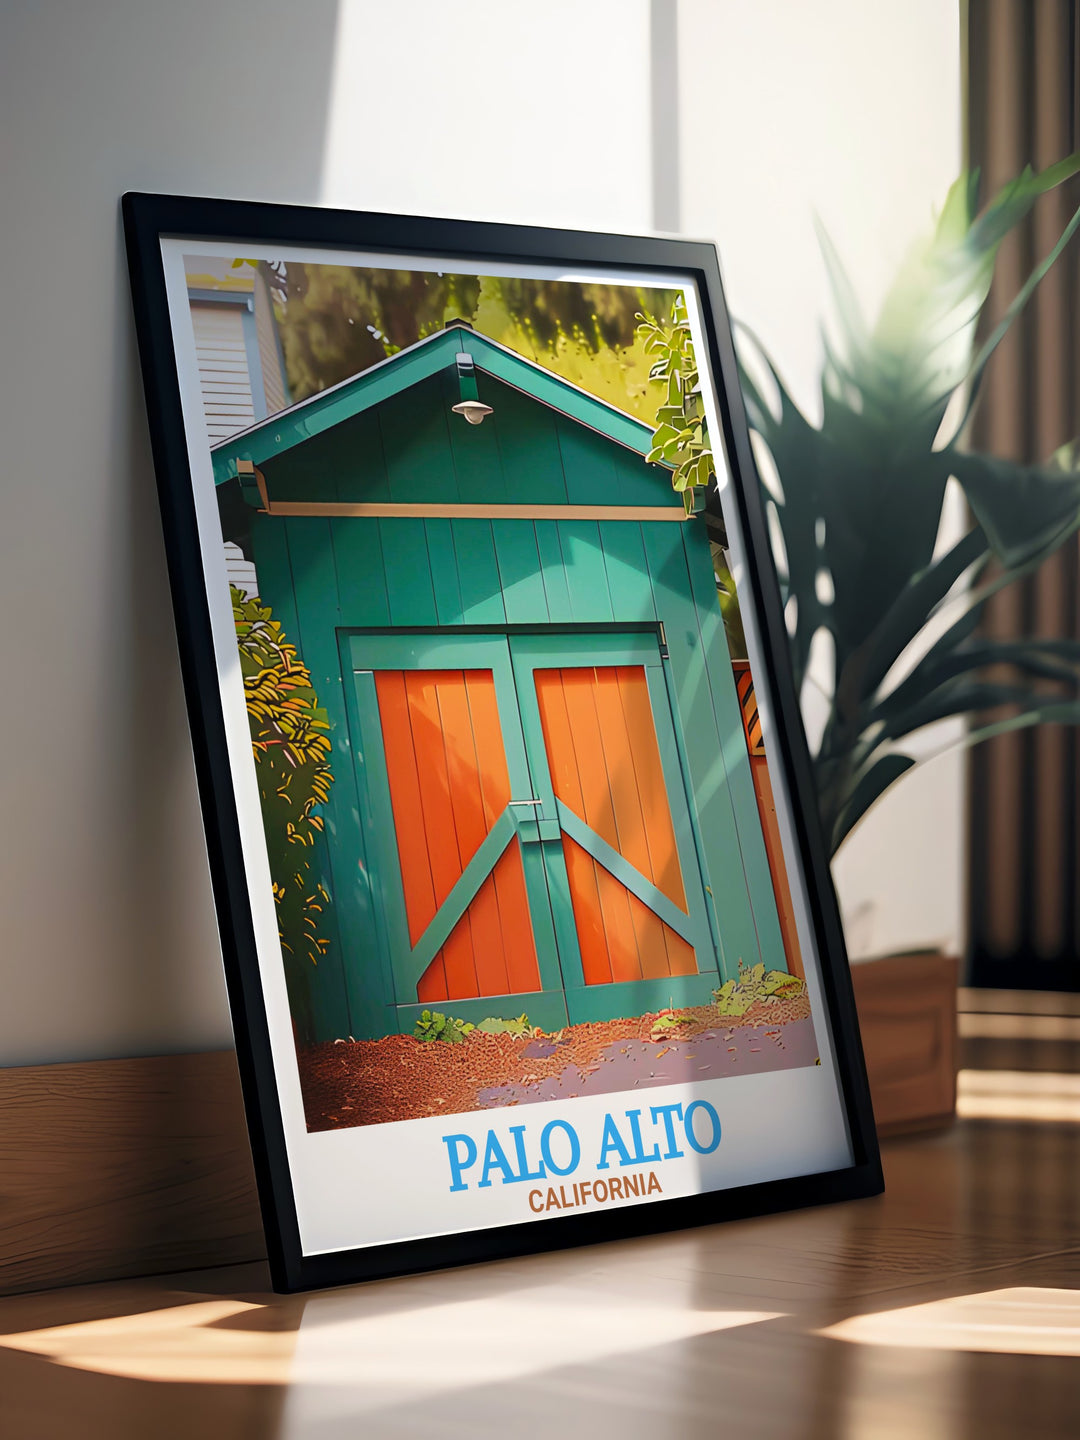 Personalized Palo Alto poster featuring the famous Hewlett Packard Garage. A travel poster print that blends vintage aesthetics with a modern touch, highlighting the iconic Hewlett Packard Garage and Palo Altos vibrant cityscape.